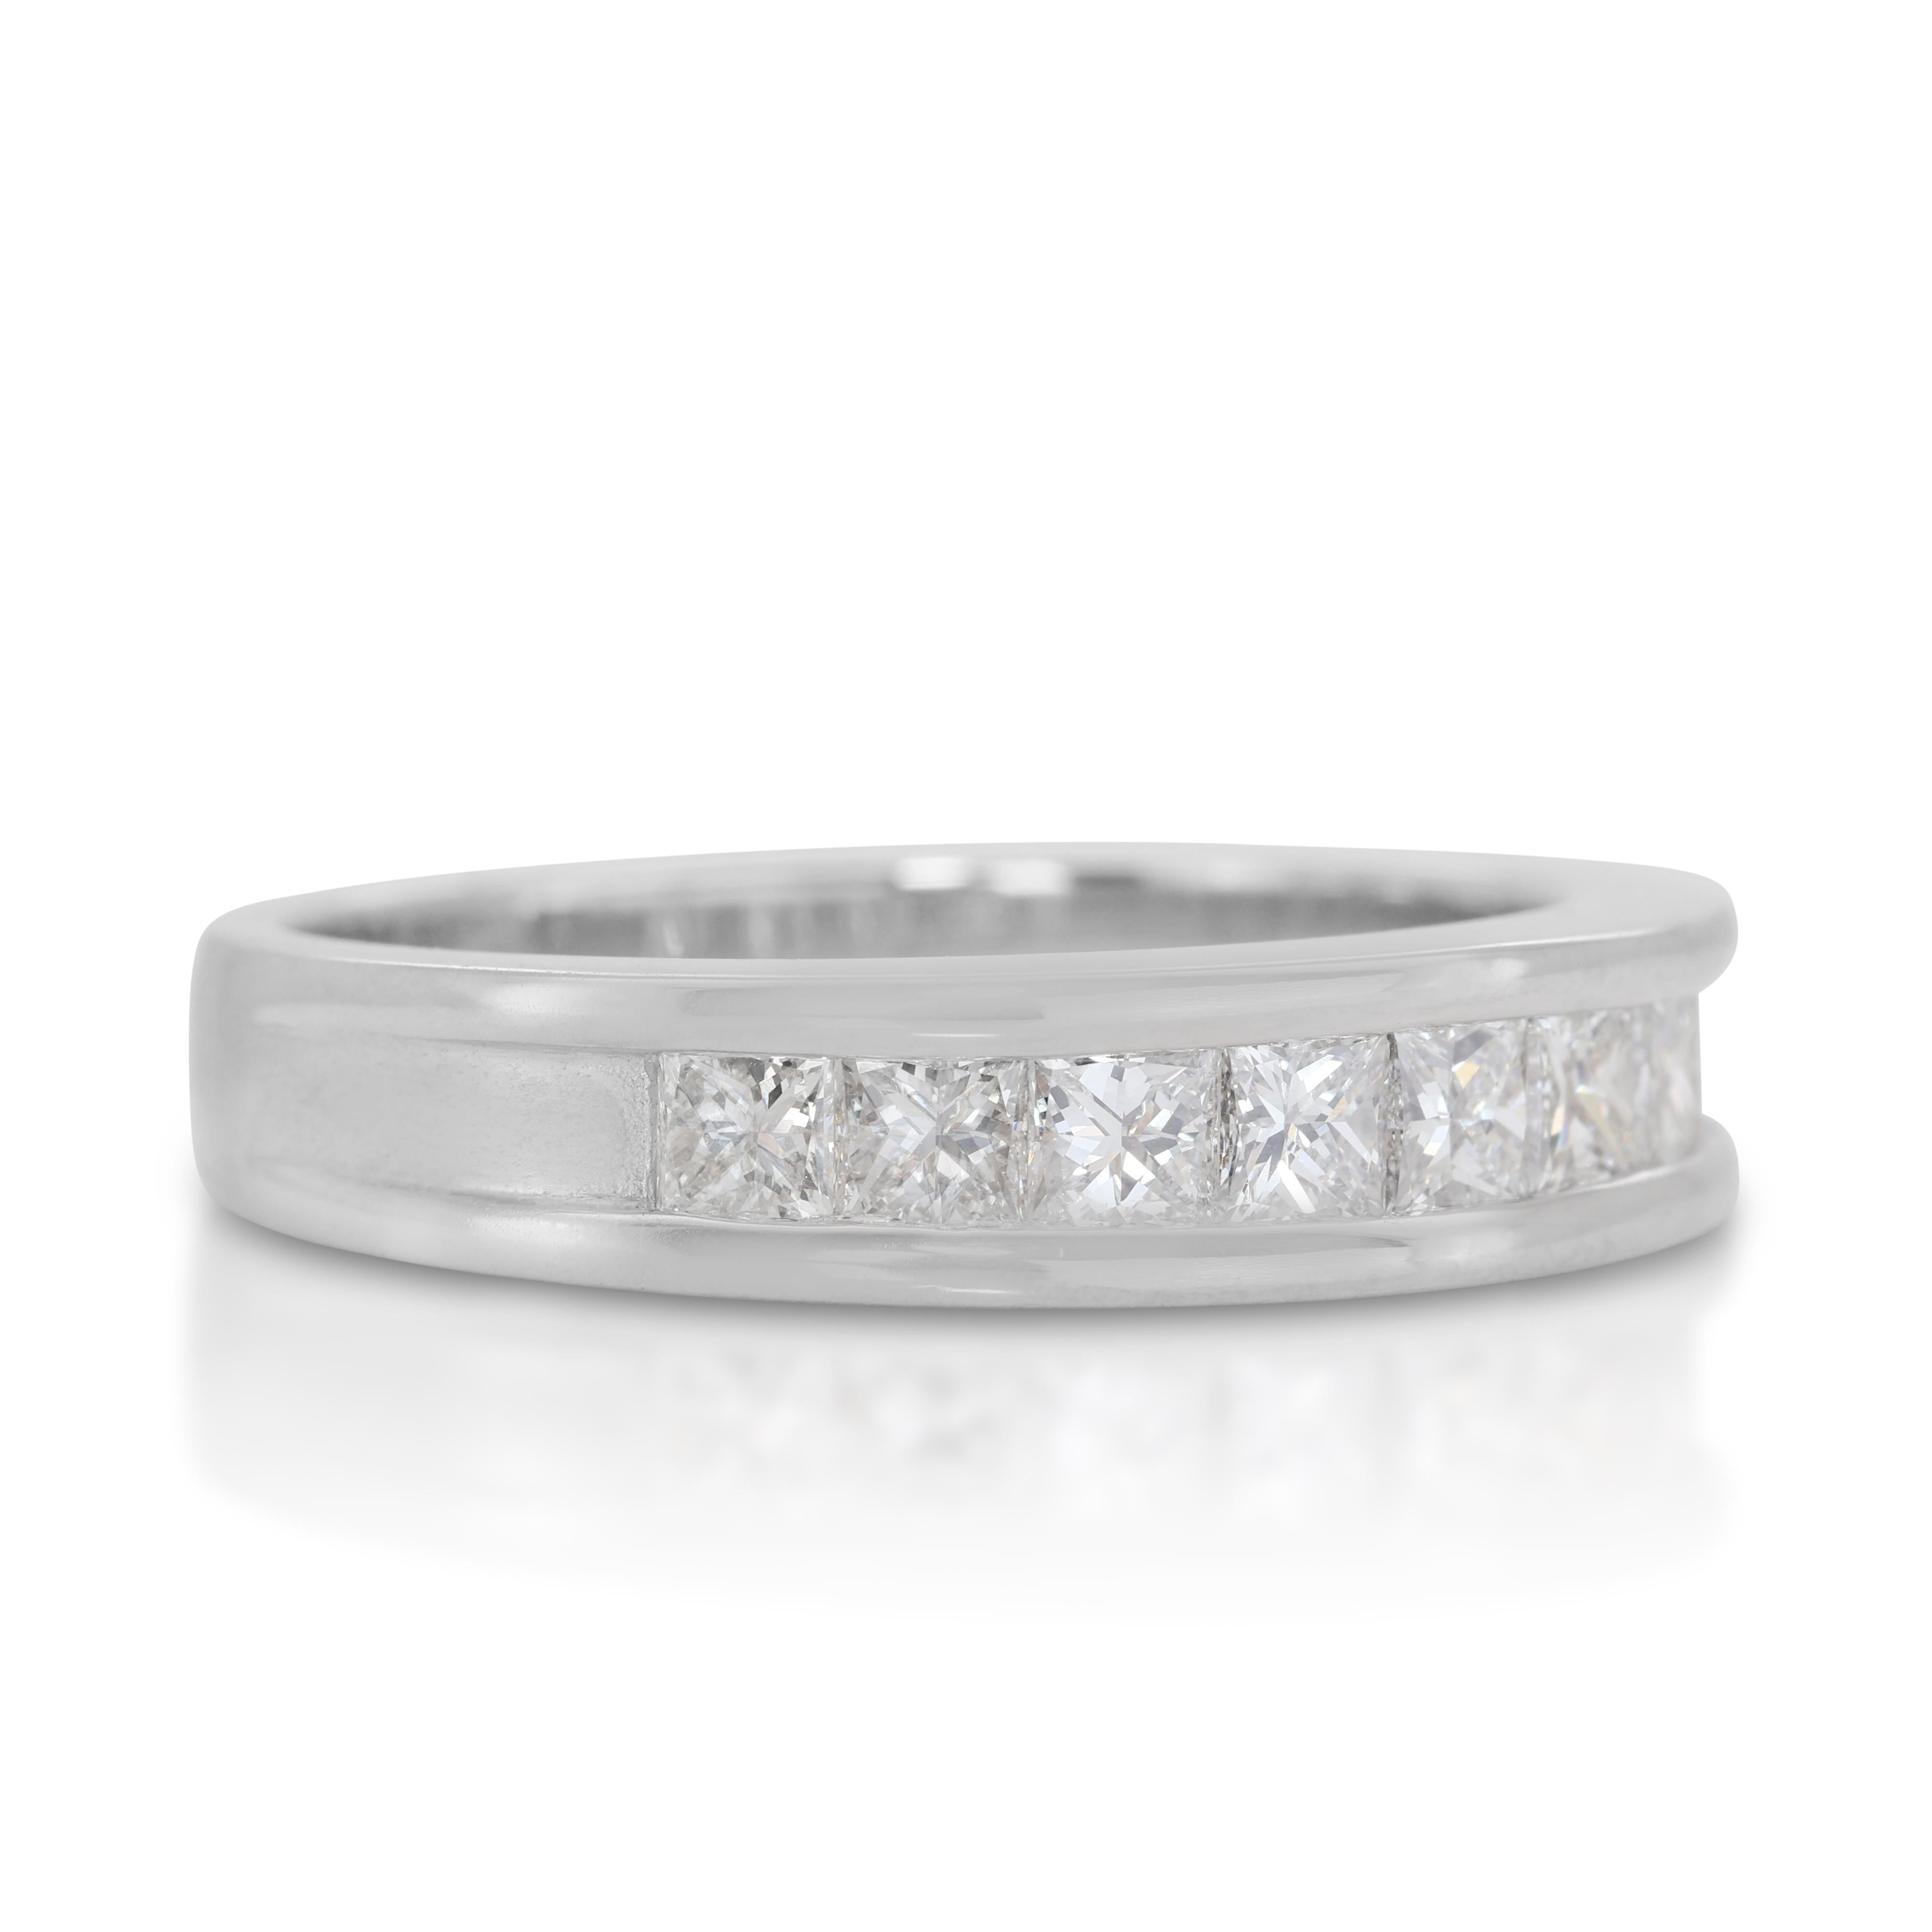 Luminous 3.03 ct Princess Cut Diamond Pave Ring in Platinum - IGI Certified

Featuring 20 princess-cut diamonds that collectively weigh 3.03-carat, this ring is a testament to enduring beauty and craftsmanship. Crafted from the finest platinum,